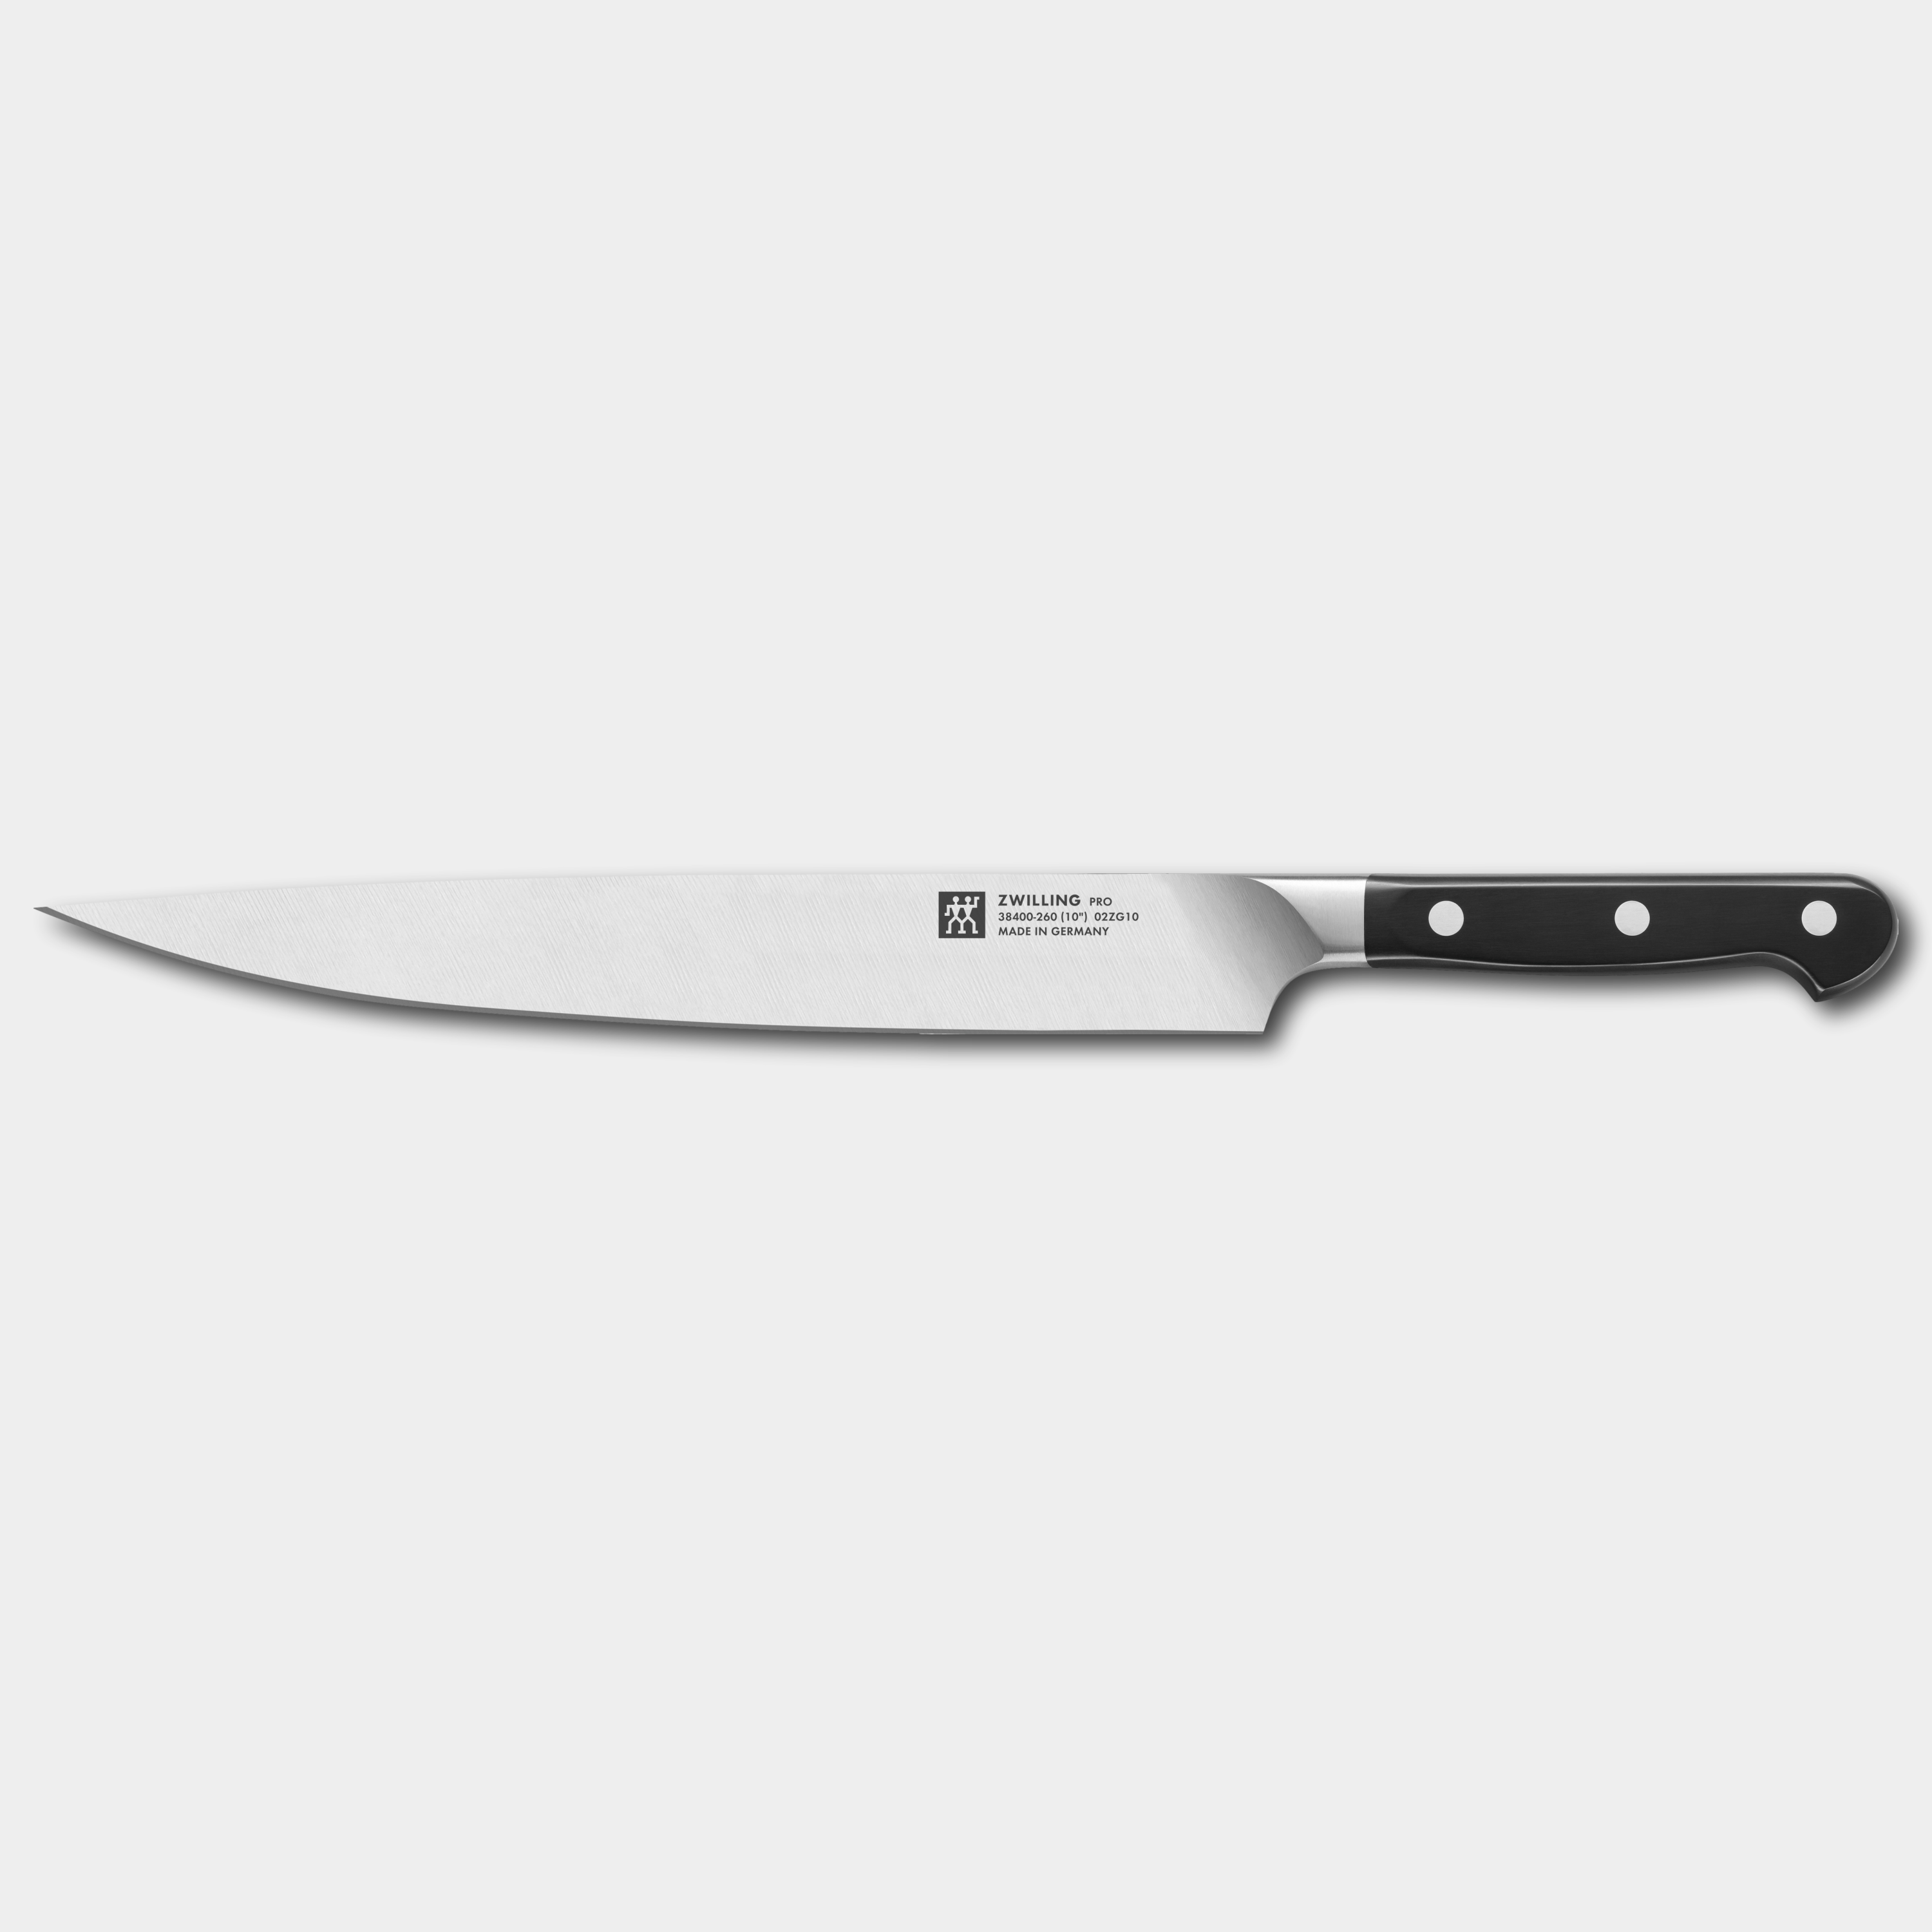 ZWILLING® Pro 26cm Carving/Slicing Knife